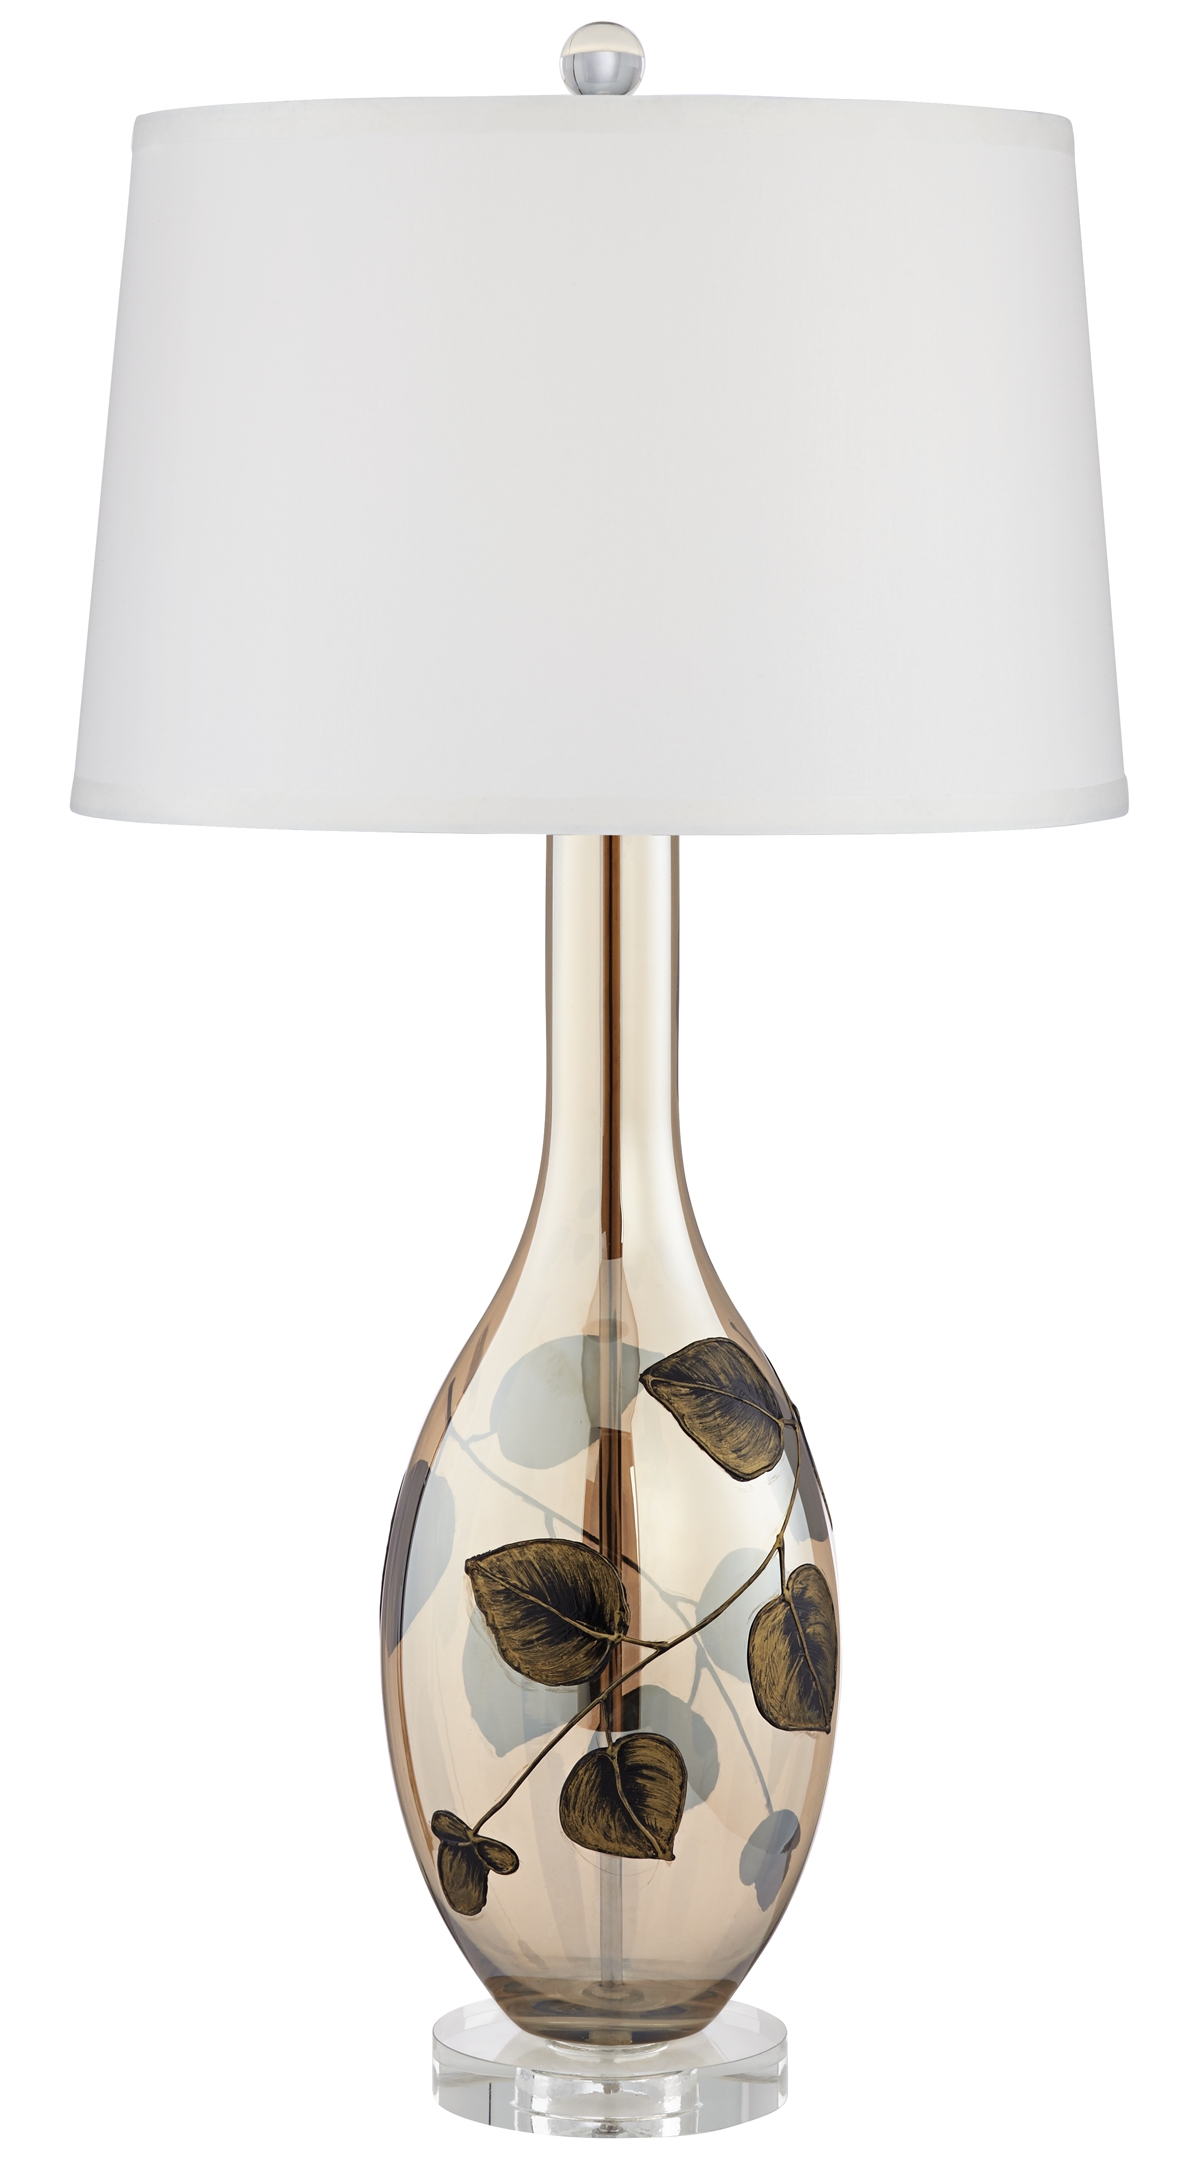 UPC 736101000082 product image for Pacific Coast Flower Pattern Glass Table Lamp | upcitemdb.com